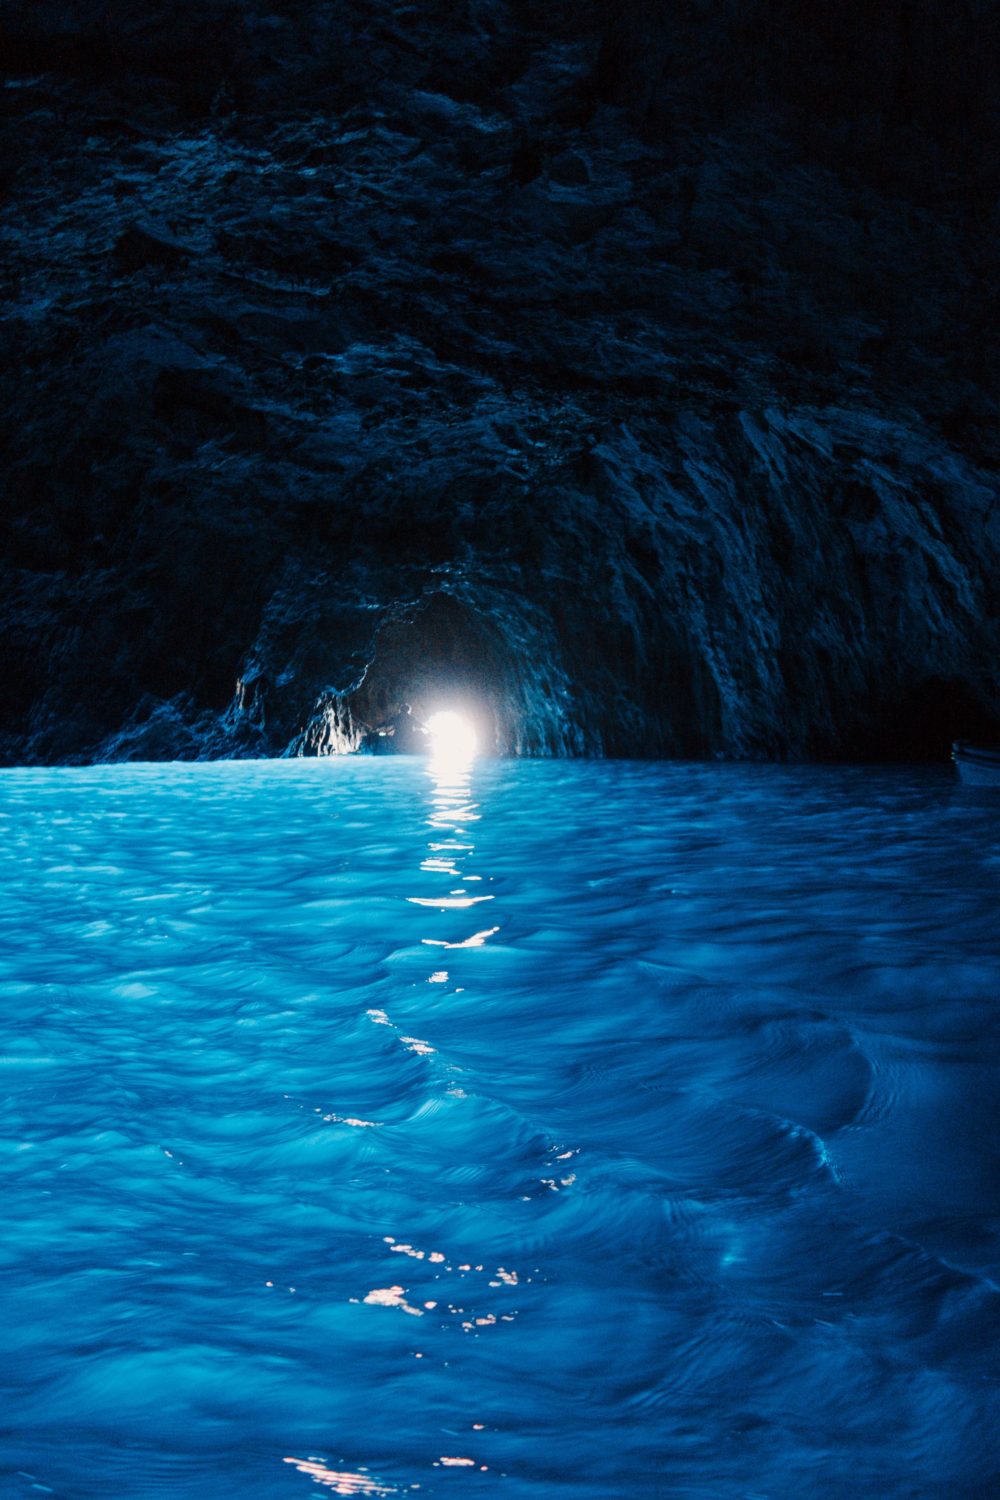 Day Trip to Stunning Capri, Italy | 9 Things You Shouldn't Miss: Blue Grotto | Dana Berez Travel